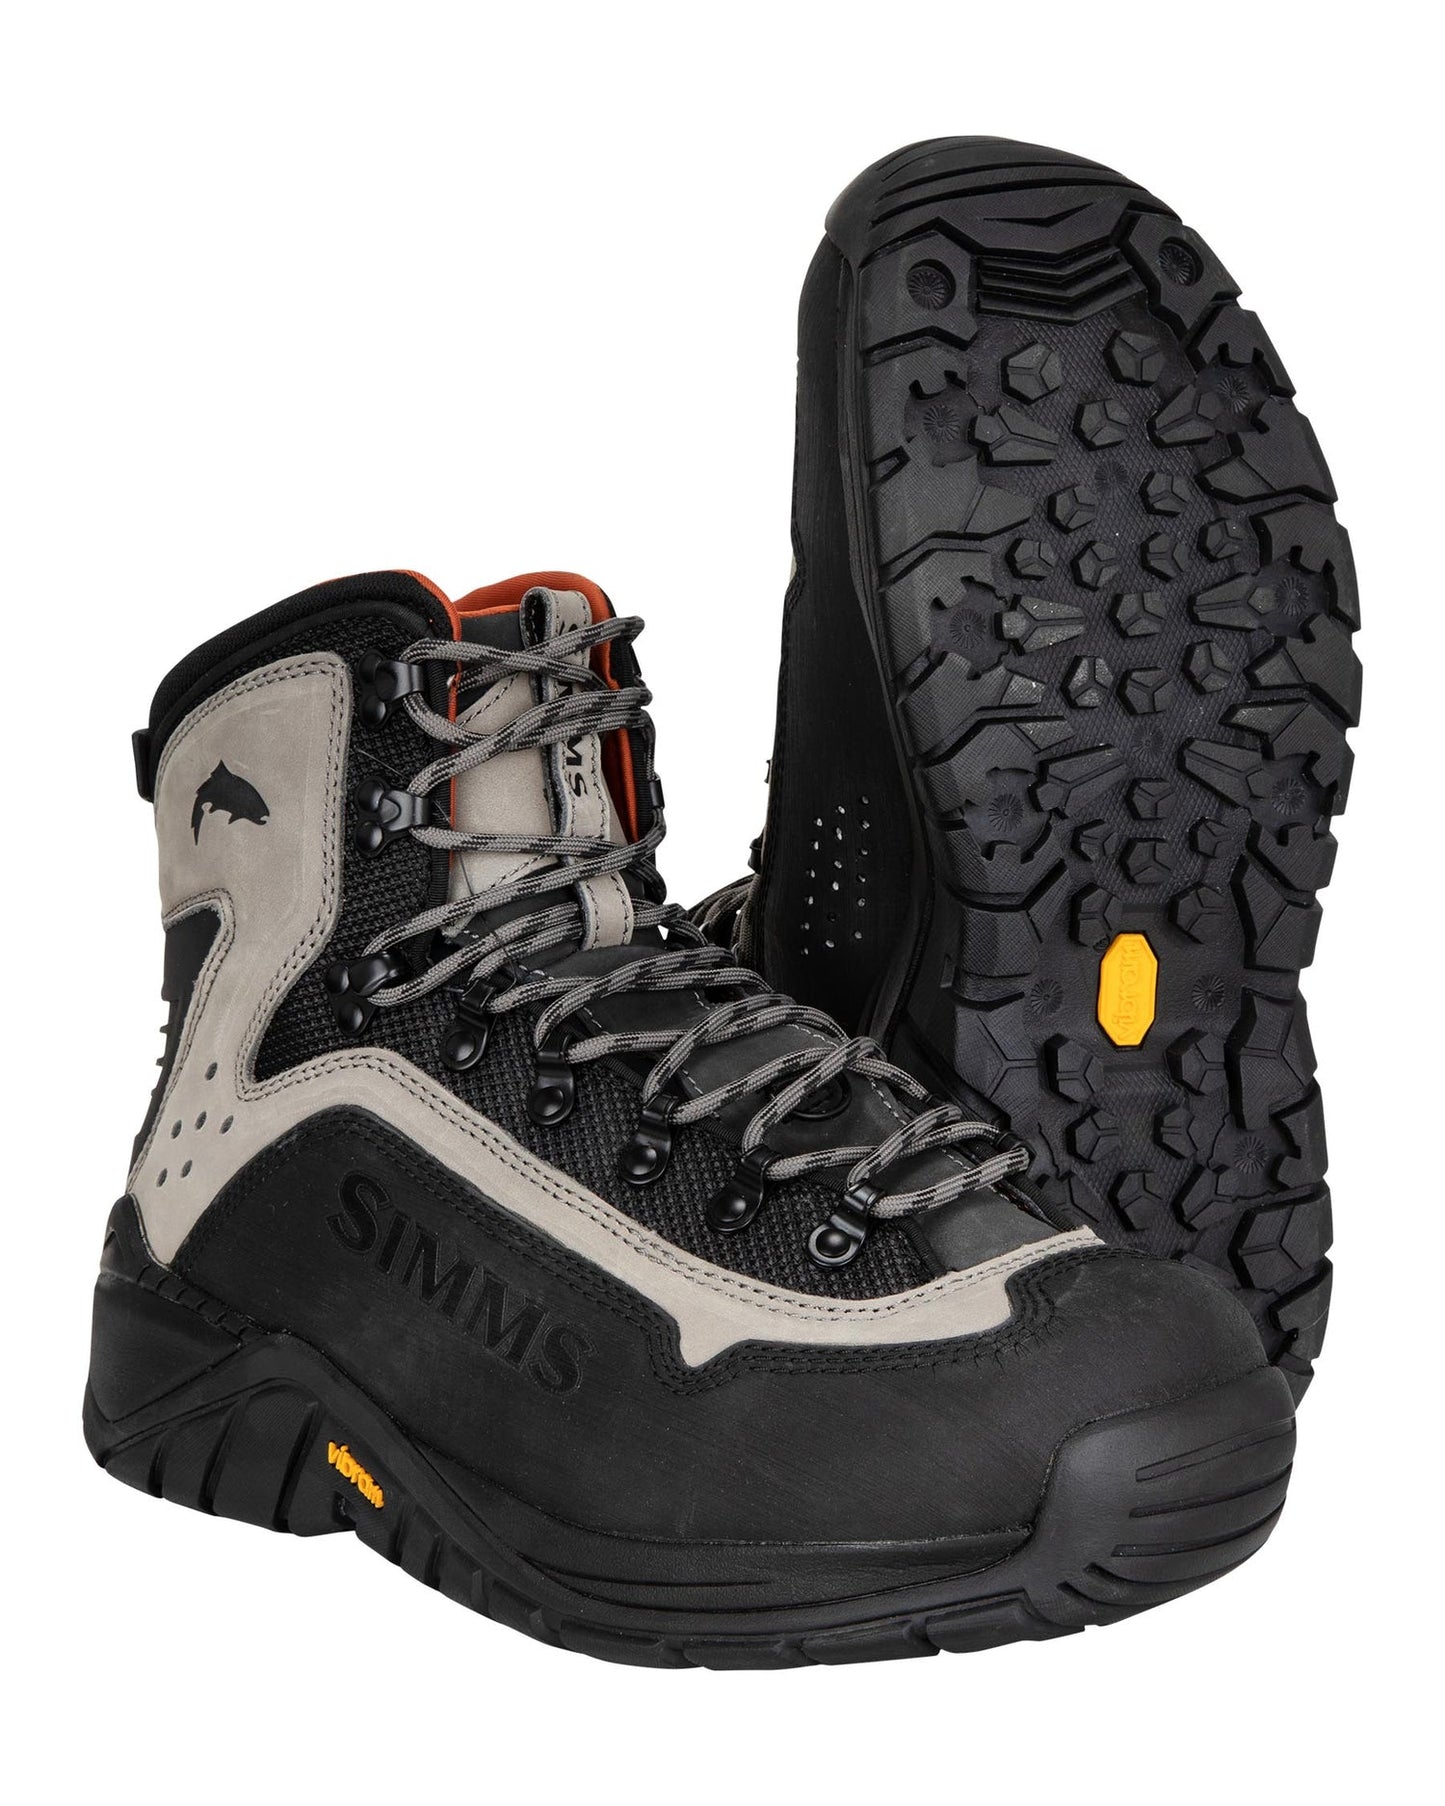 Simms G3 Guide Boots - Sportinglife Turangi 